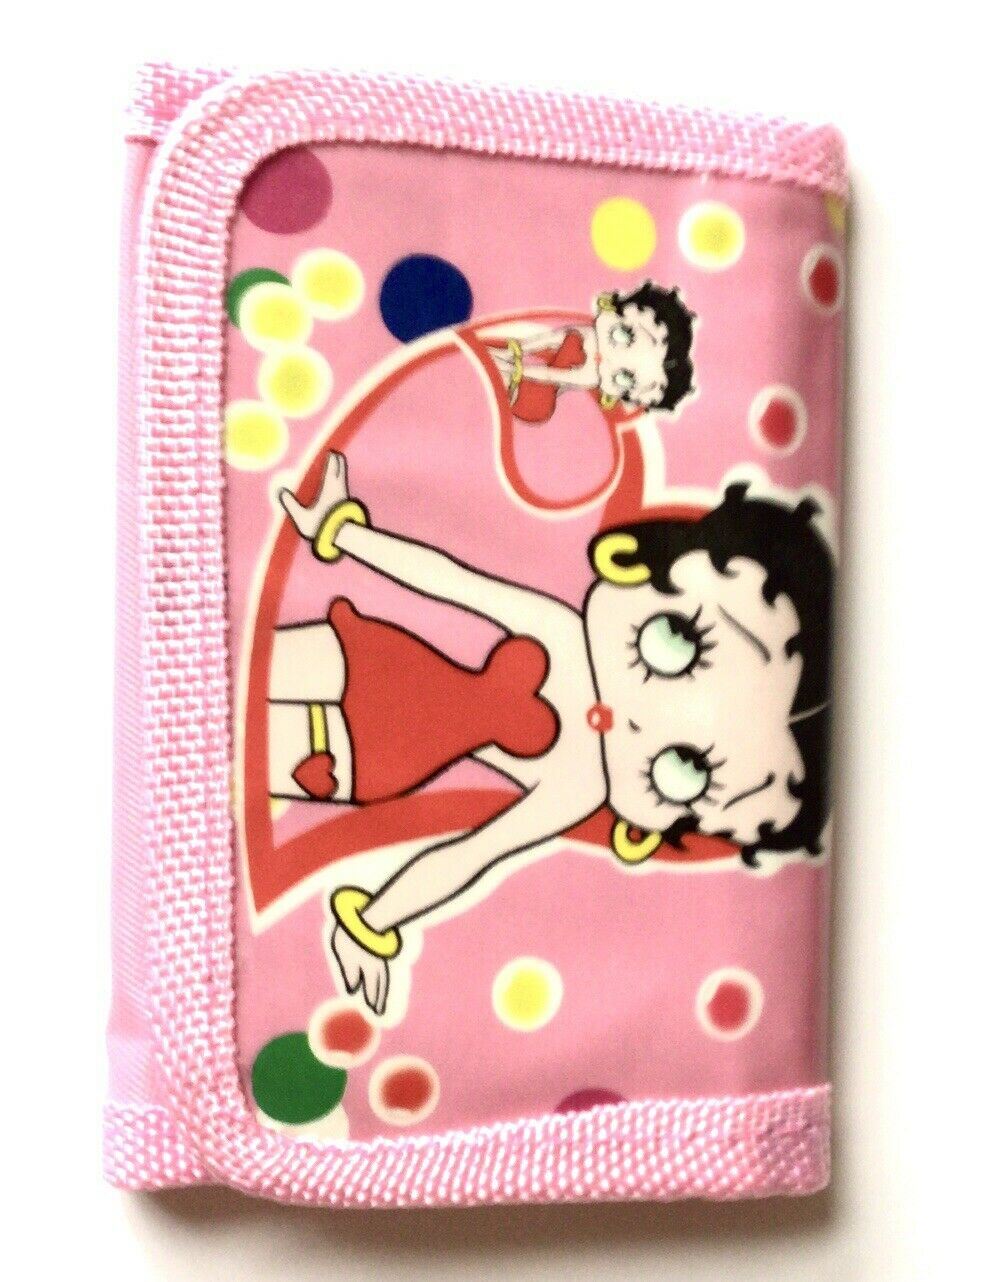 BETTY BOOP KEY RING OFFICIAL WITH A FREE WALLET JUST ARRIVED PINK BB